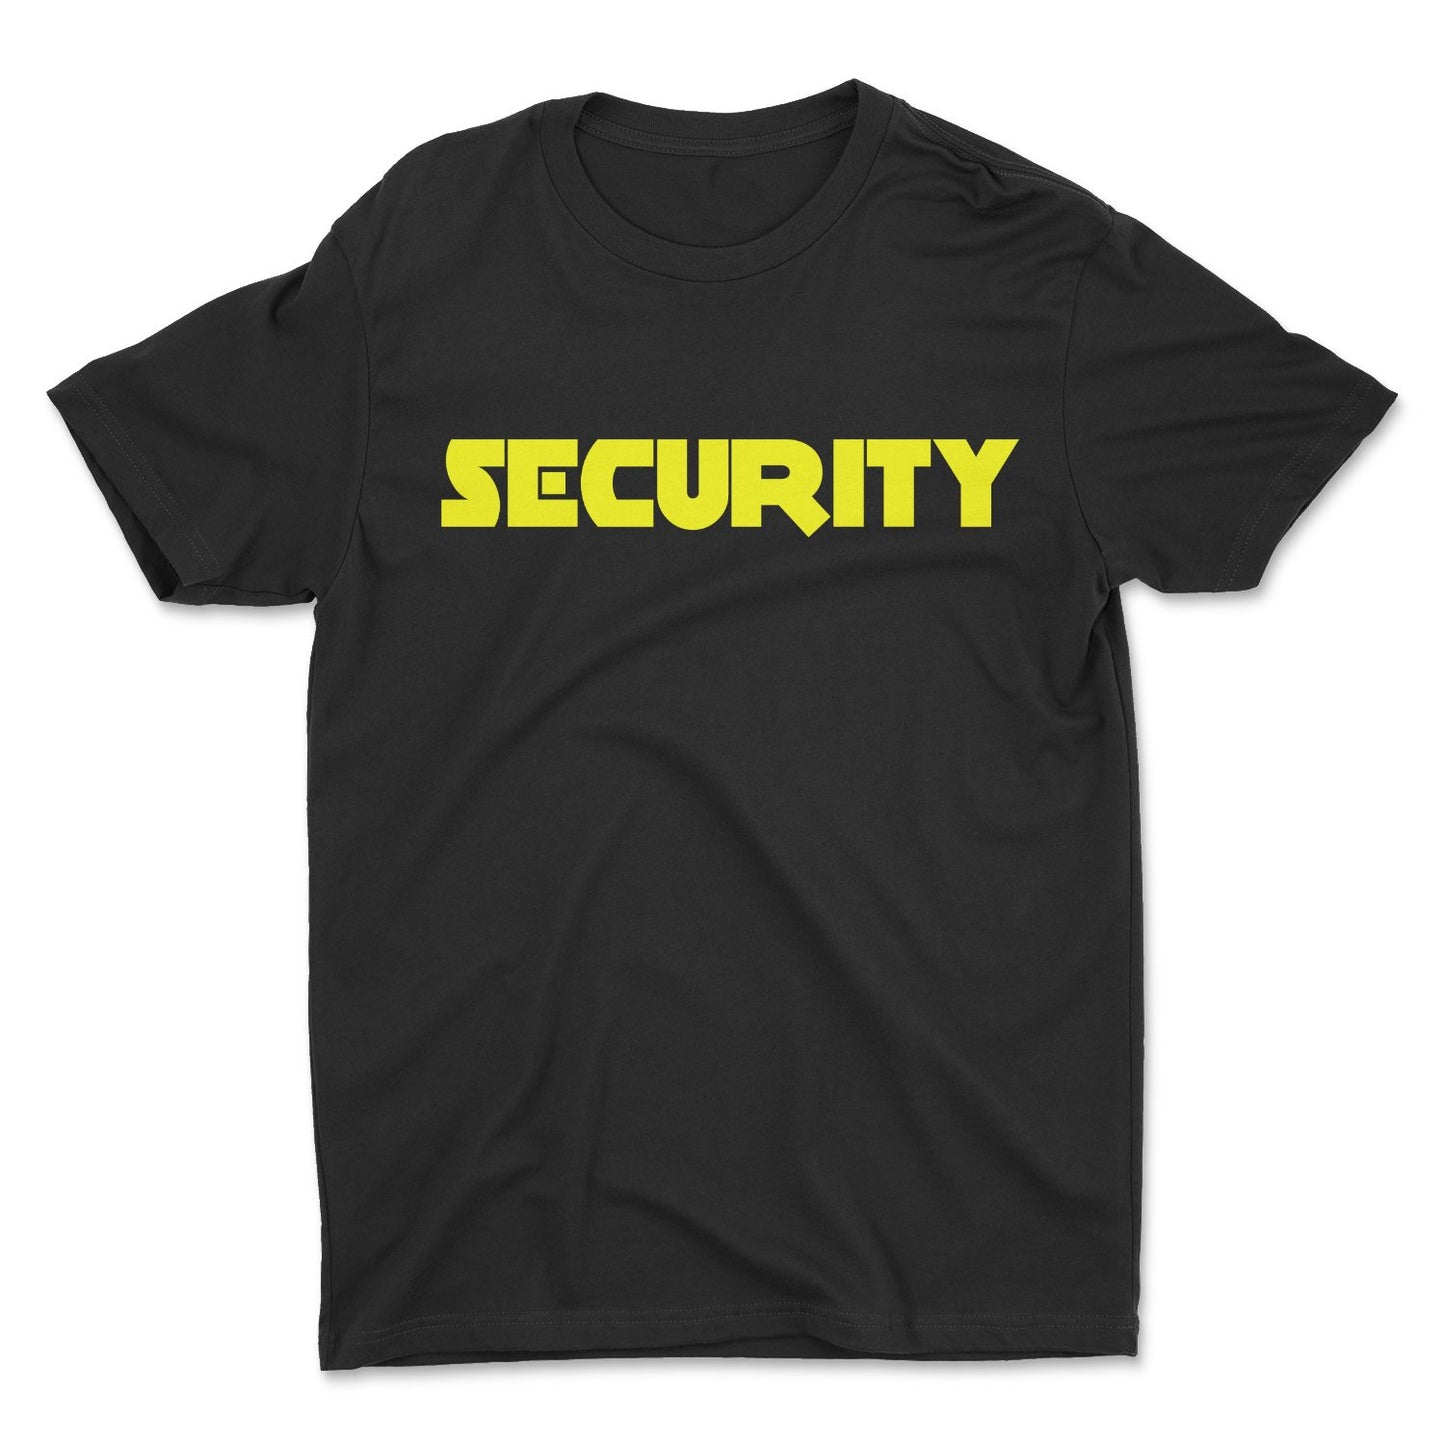 Security T-Shirt Front & Back Men's Event Staff Tee Black Neon Yellow